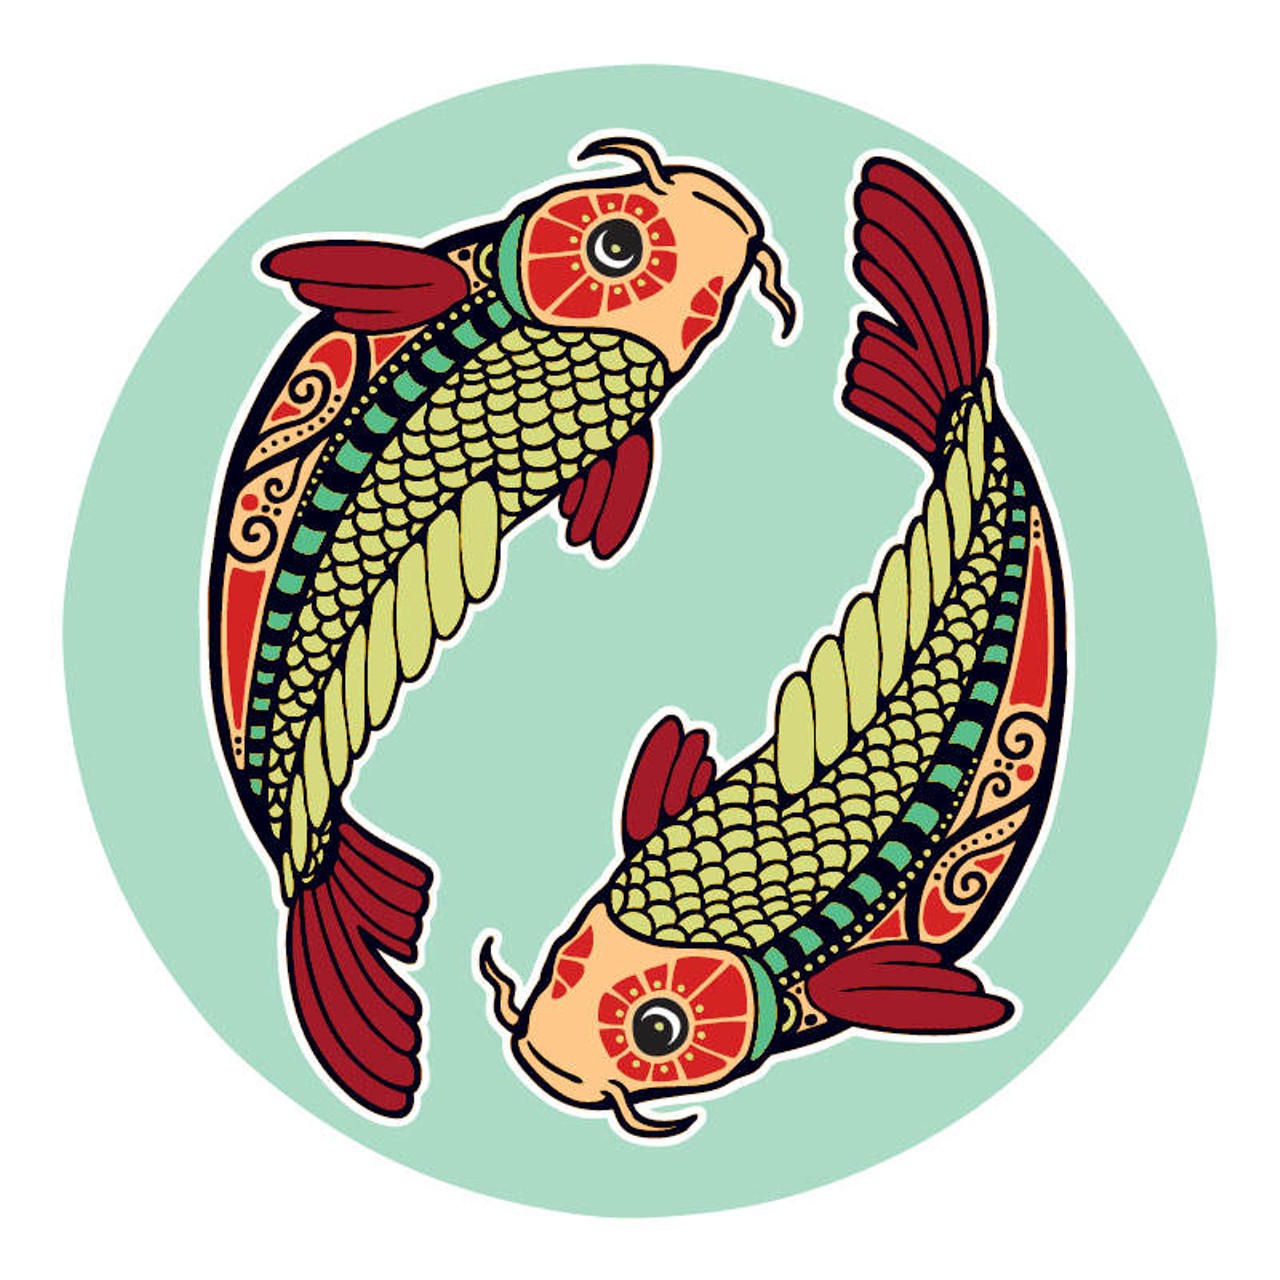 PISCES: February 21 &#150; March 20
If you think too much it'll disturb the need to remember that you are better off when you come from a place of total trust. The forces that weigh you down are numerous. David and Goliath themes are epic. Worry and fear aren't much help in these situations; neither is blind faith. You have this all figured out on some level - getting to that level? That's the trick. Part of everything involves having all your ducks in a row. You are already clear on that score. The bigger part of what's about to happen rests inside a deeper kind of faith, and the strength that got you this far.